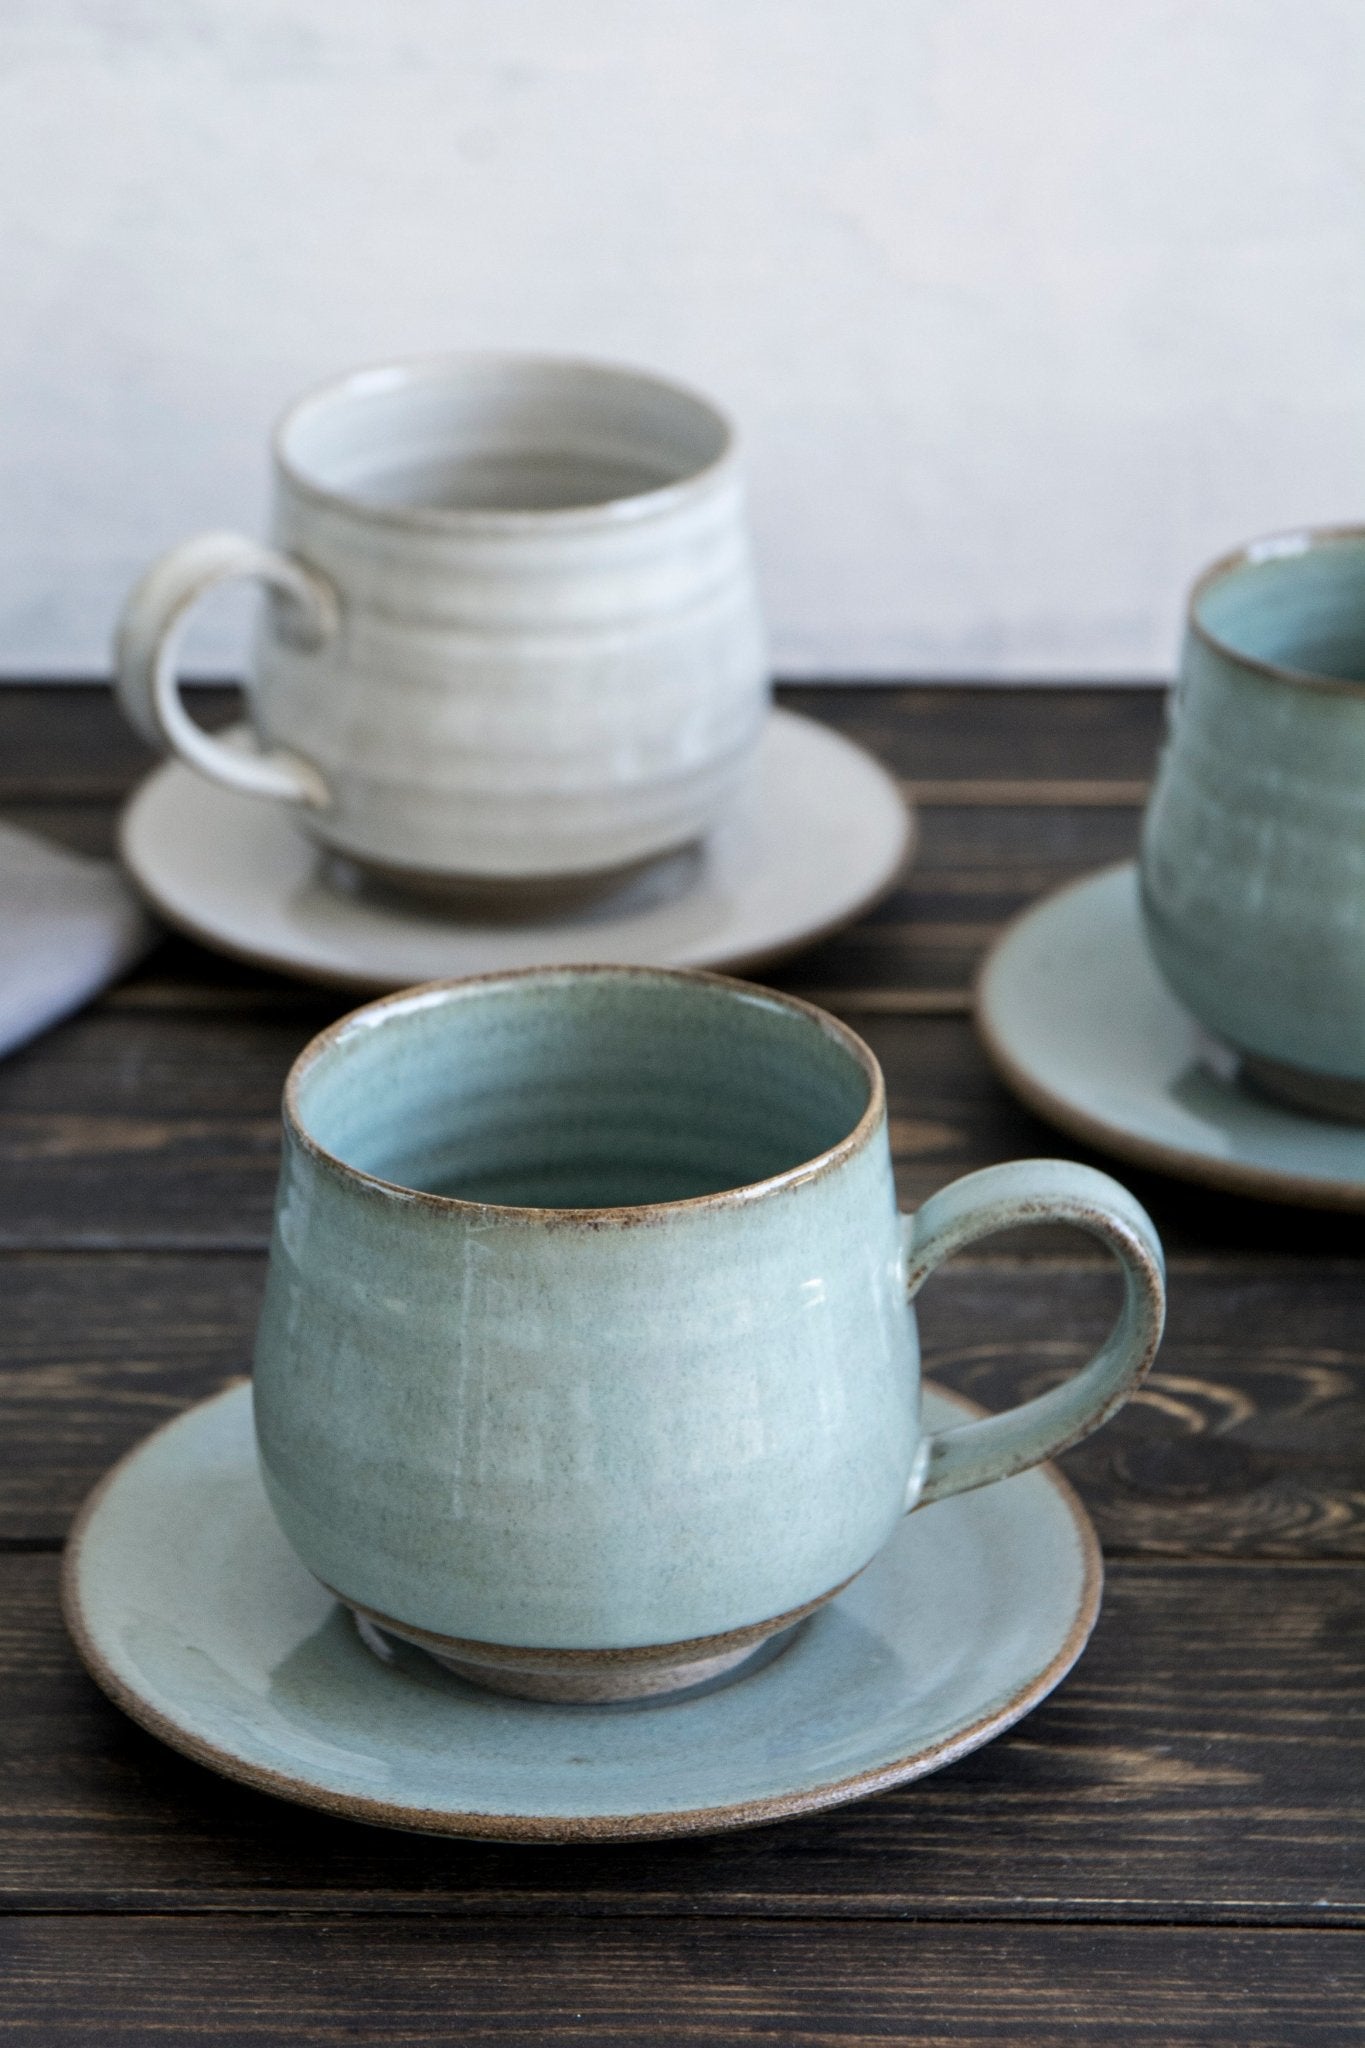 5 Great Cappuccino Cups - How to Buy a Cappuccino Cups Set